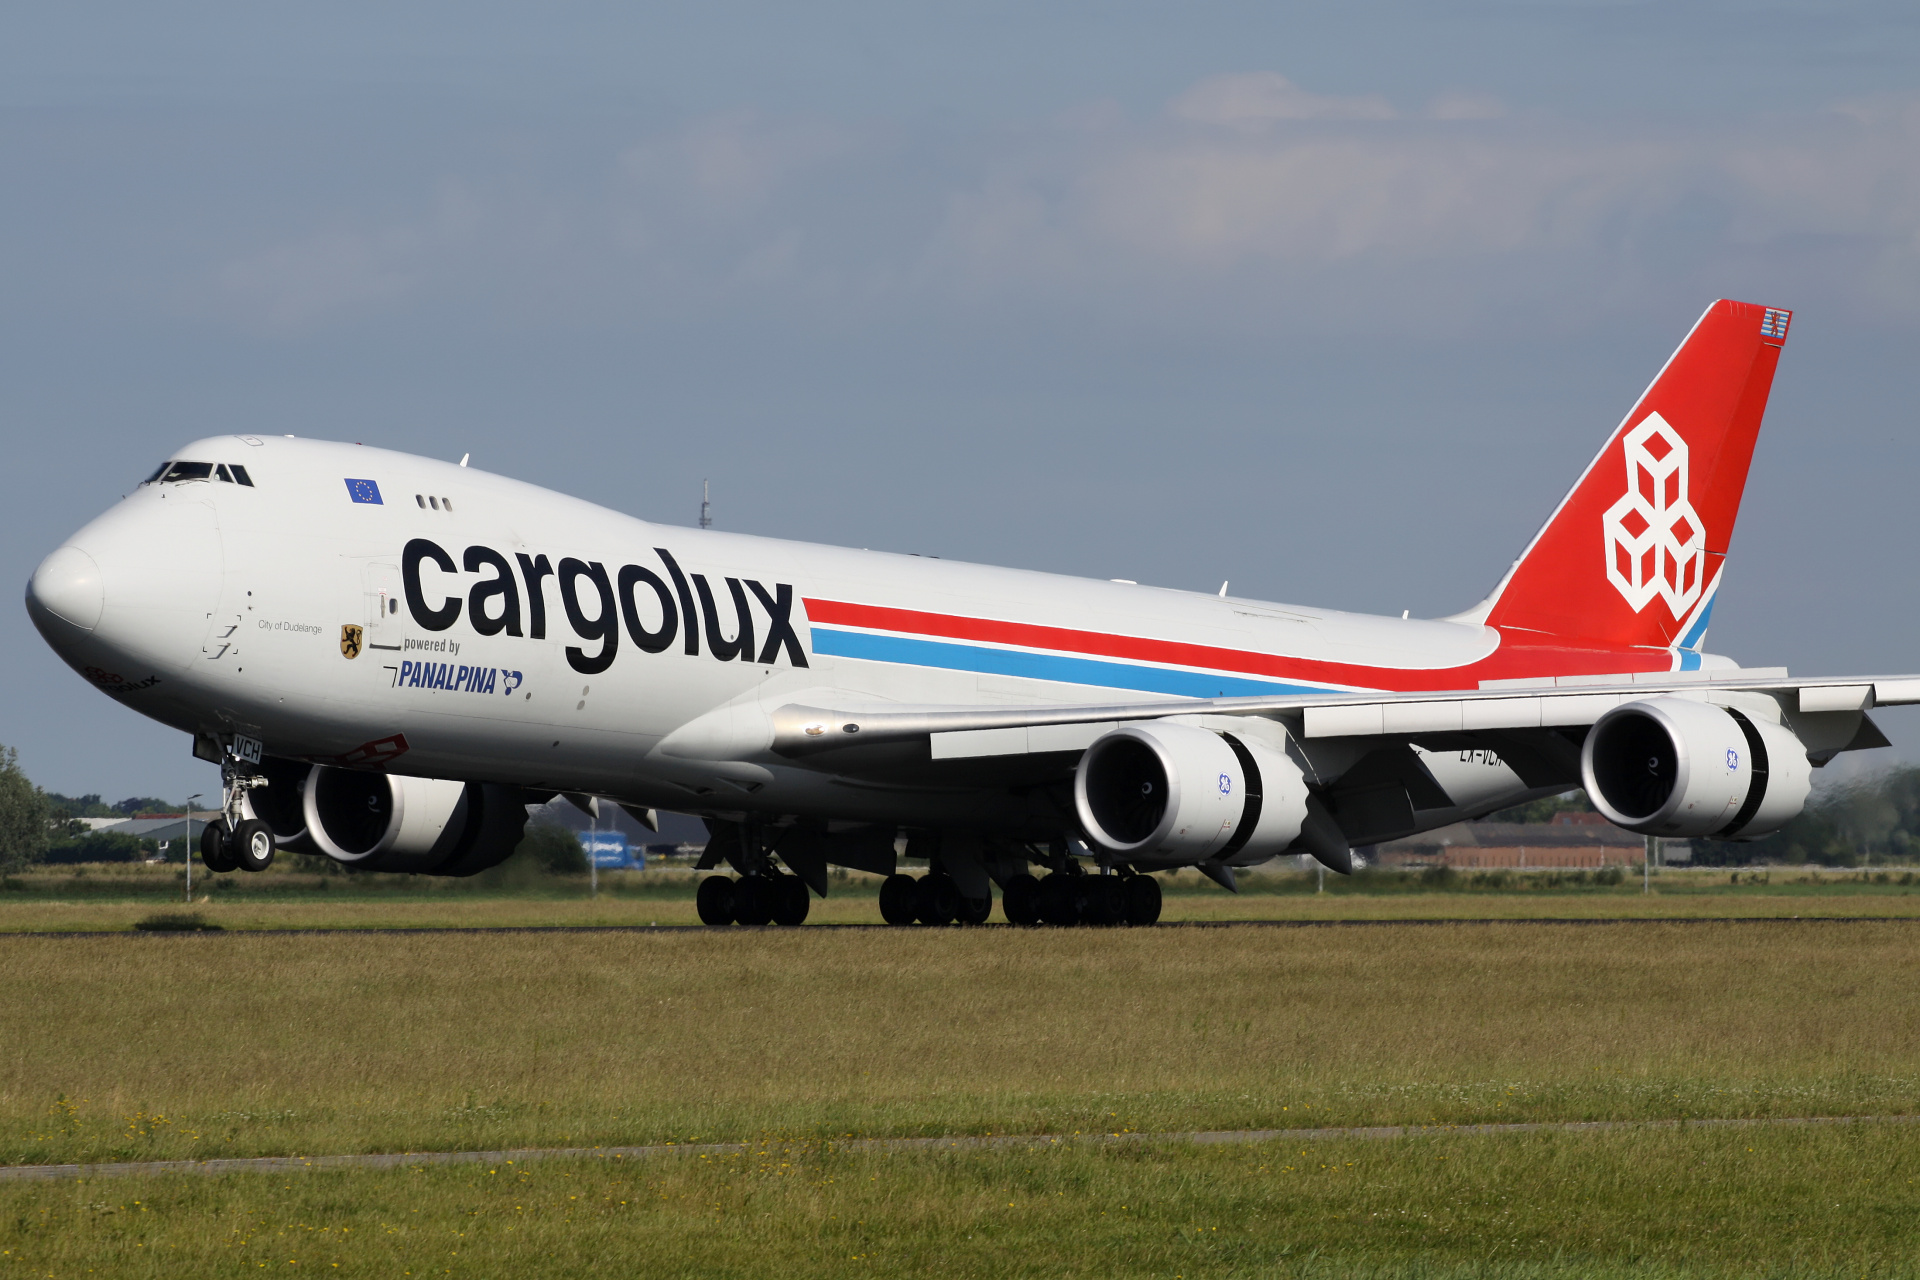 LX-VCH, Cargolux Airlines (Aircraft » Schiphol Spotting » Boeing 747-8F)